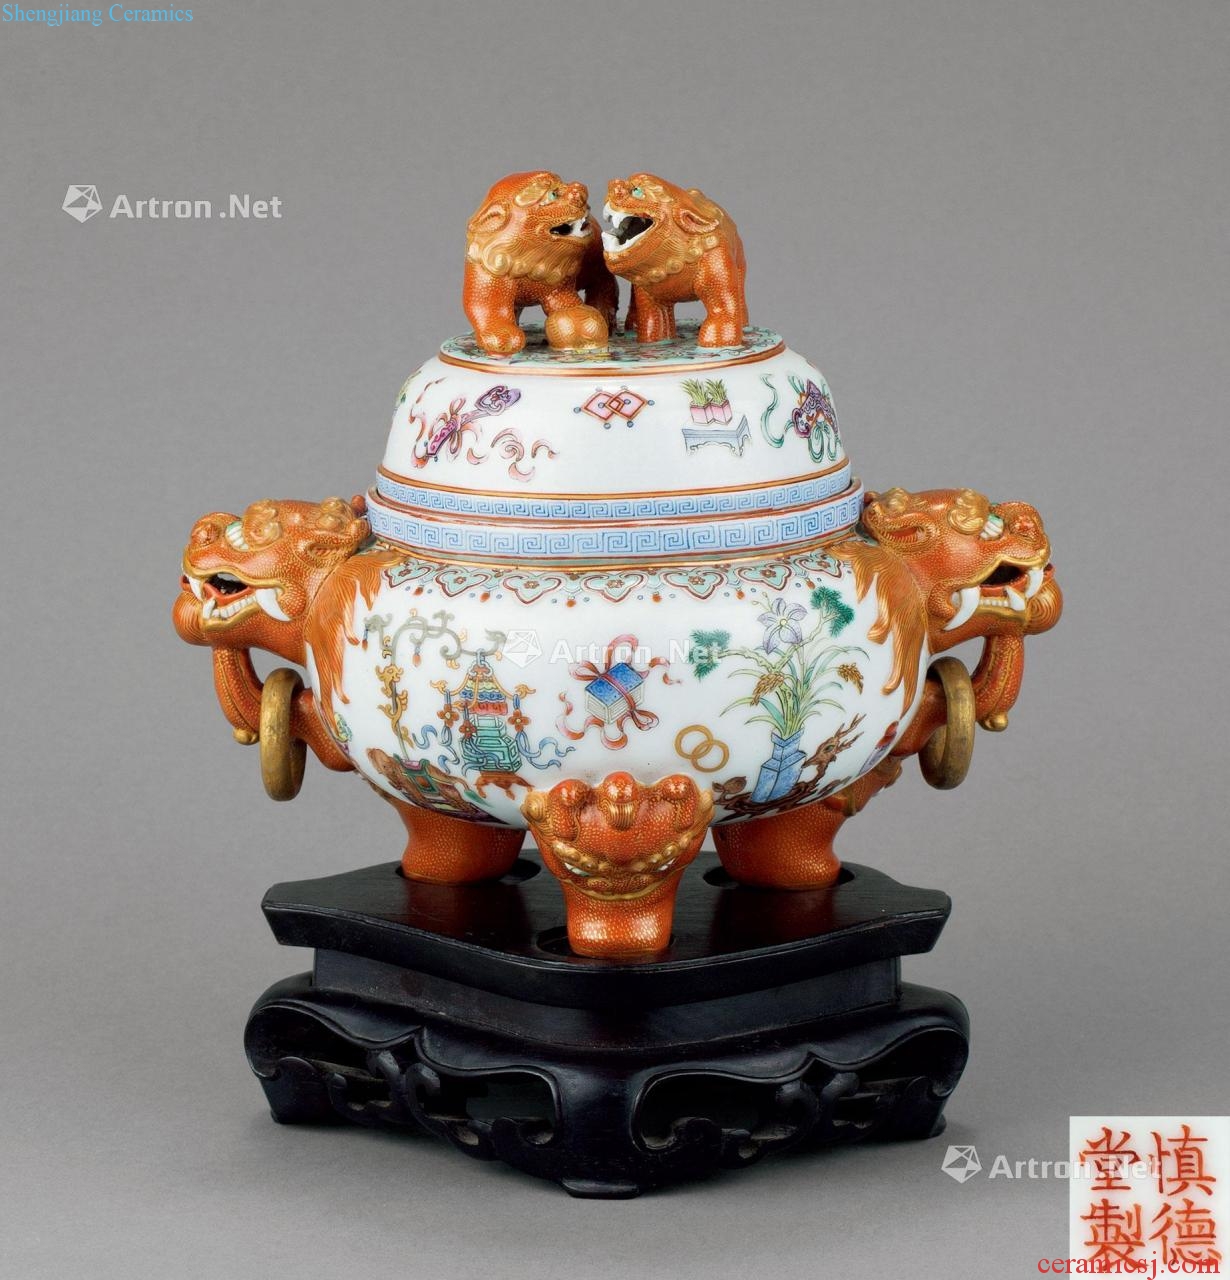 Pastel dark the eight immortals in the qing dynasty grain to double the lion ring NiuShuang ear three-legged censer